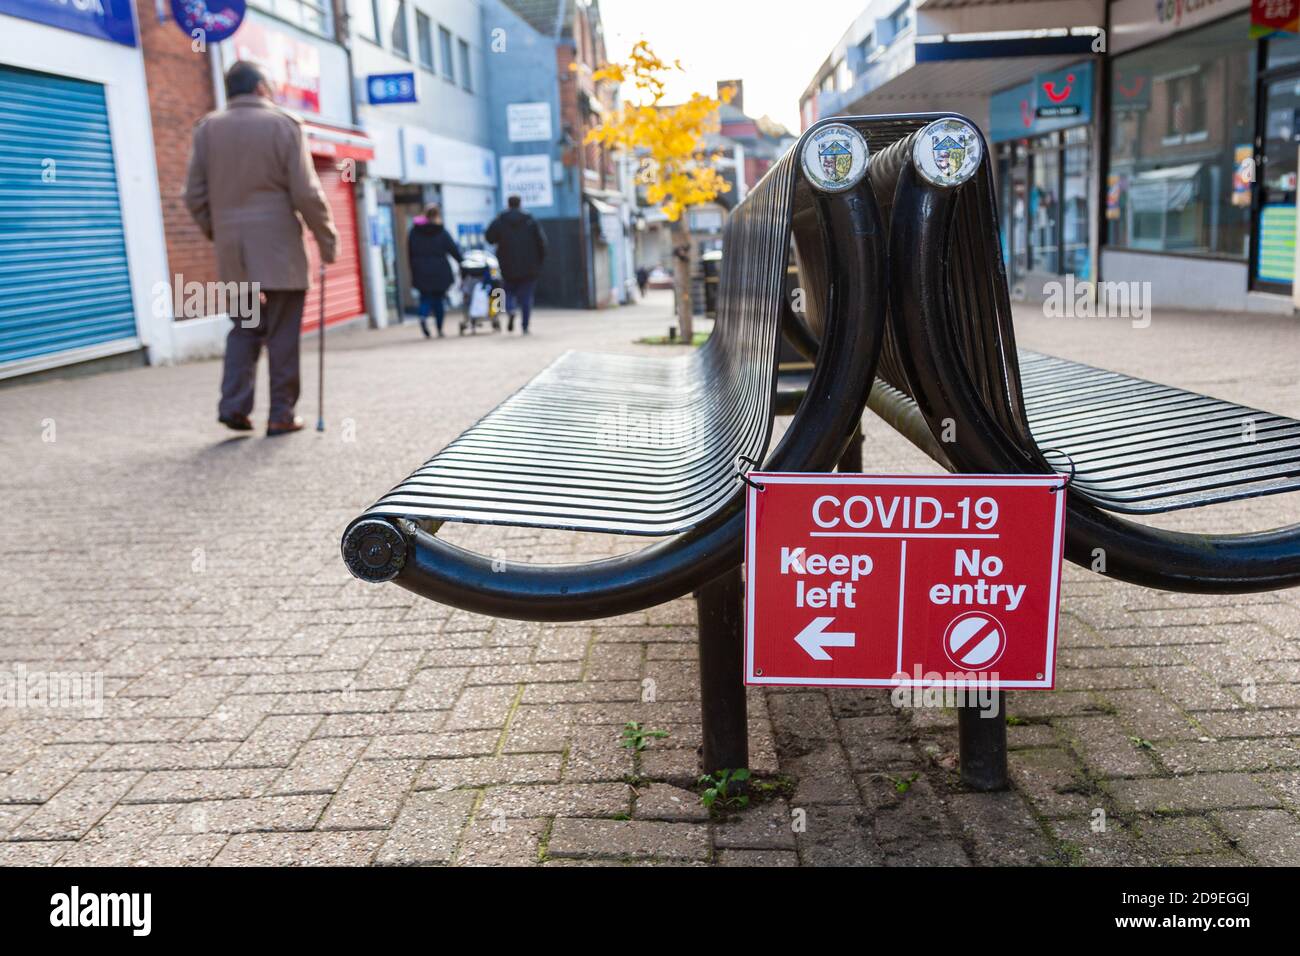 Pedestrian signs for social distancing during the Covid 19 pandemic, UK Stock Photo